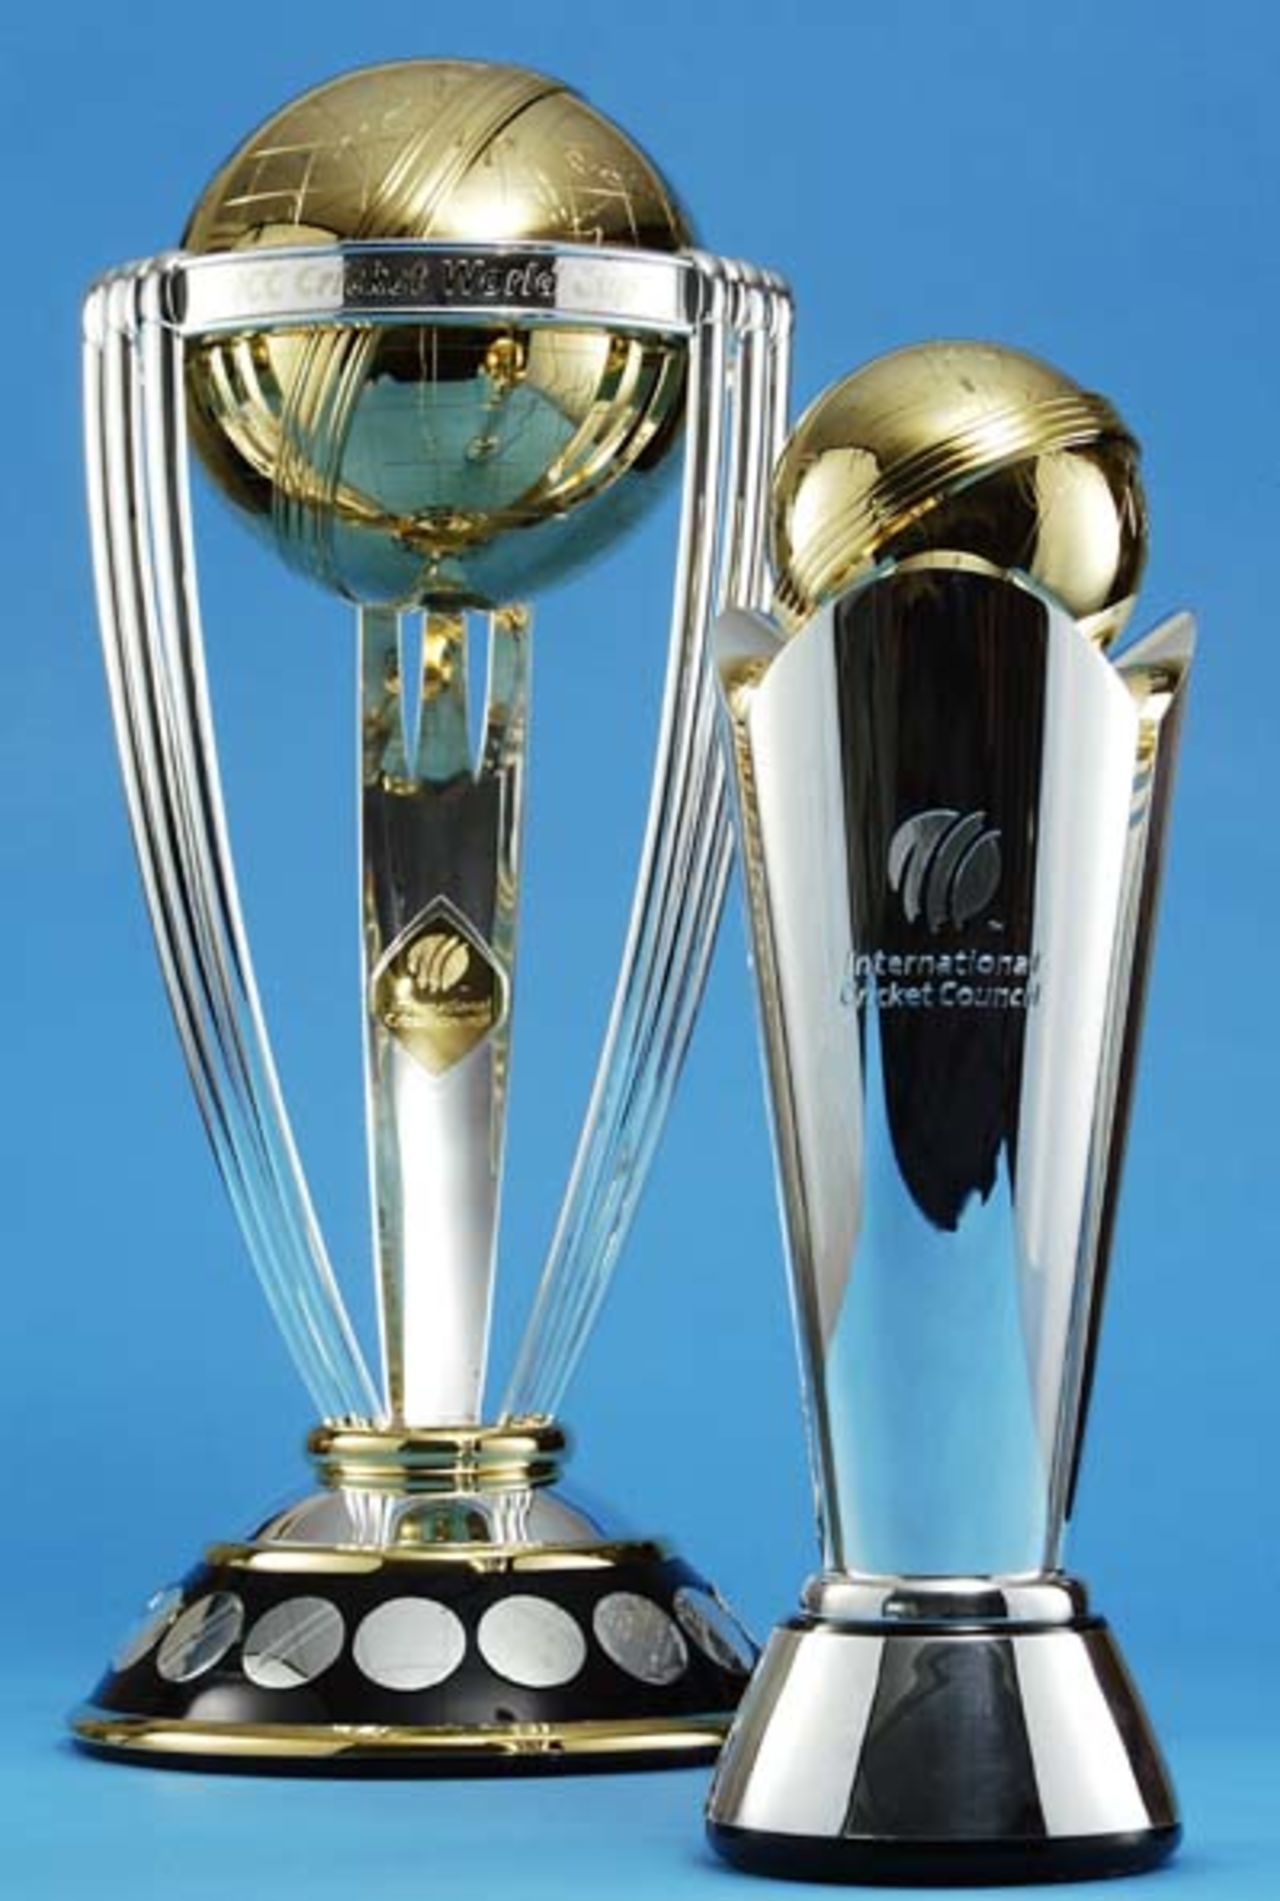 The ICC Cricket World Cup Trophy and the ICC Champions Trophy